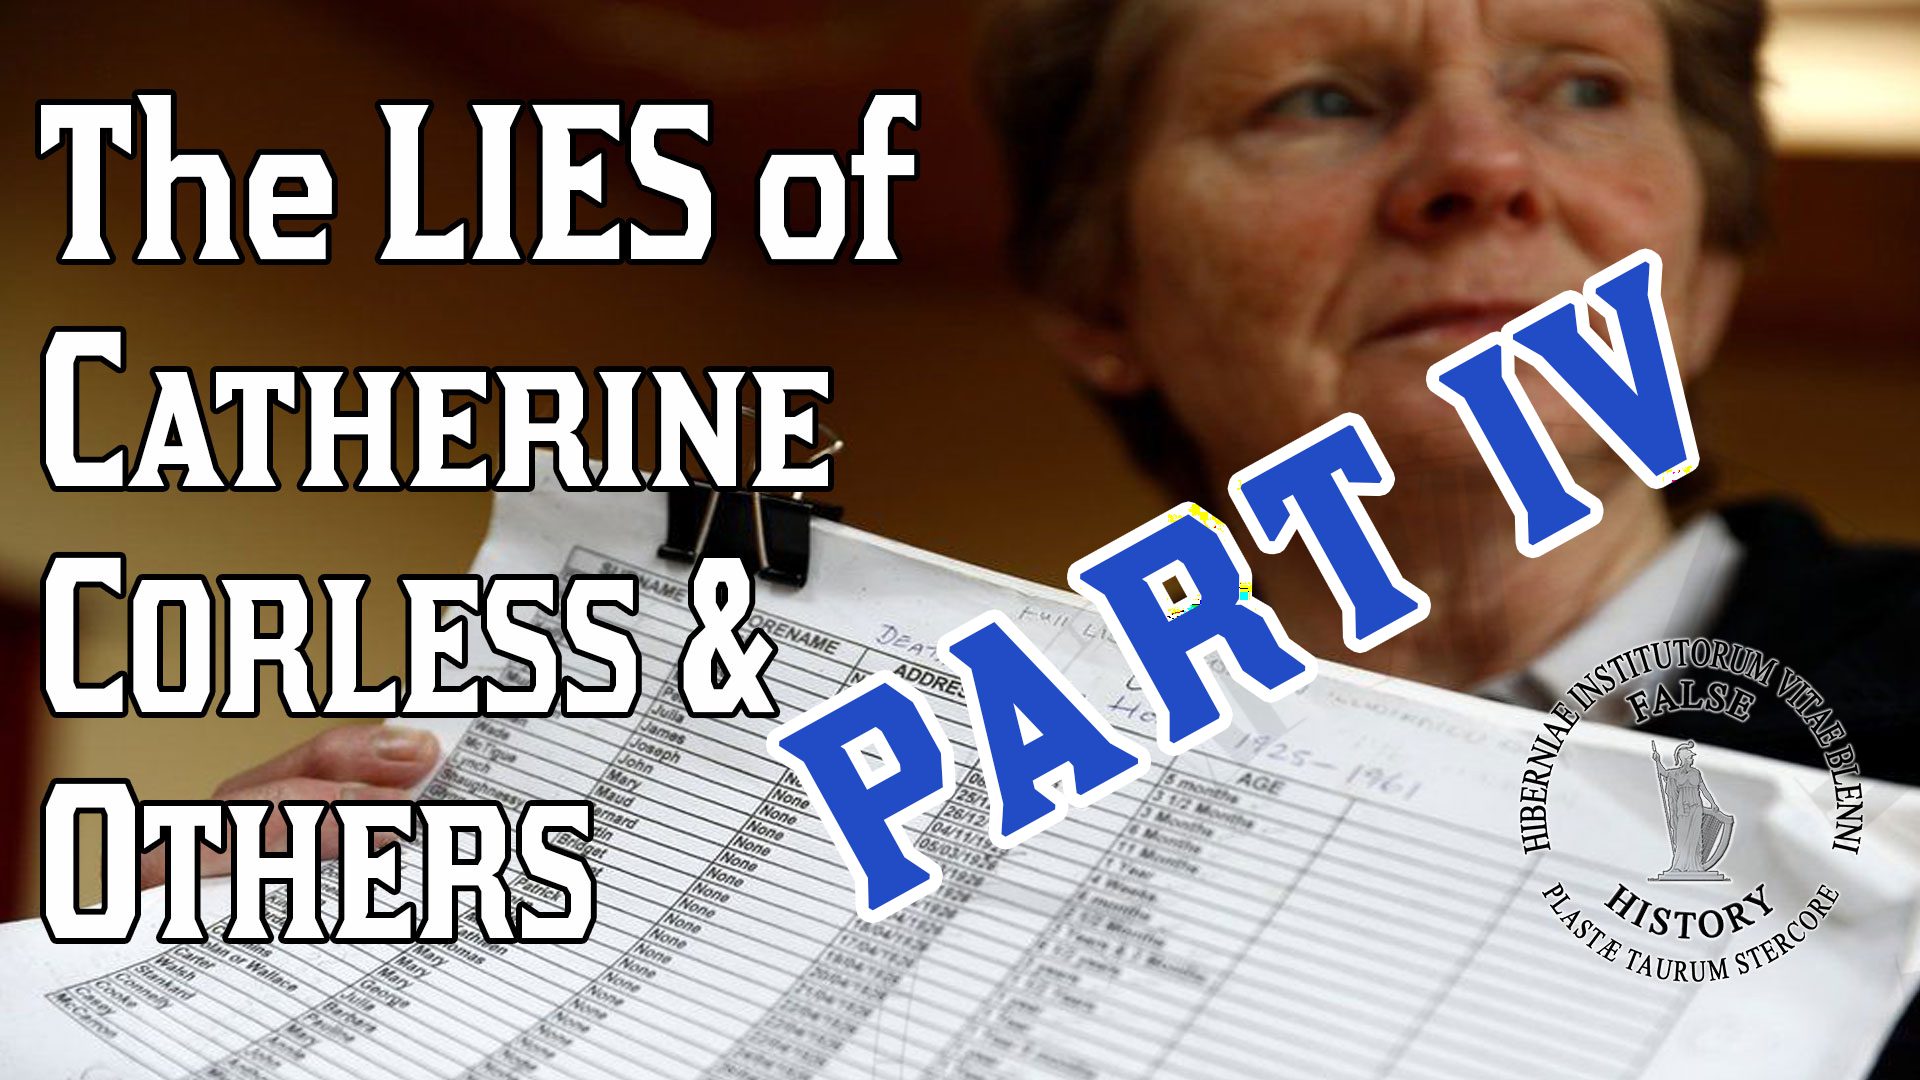 The lies of Catherine Corless and others in the Irish mother and baby homes scandals